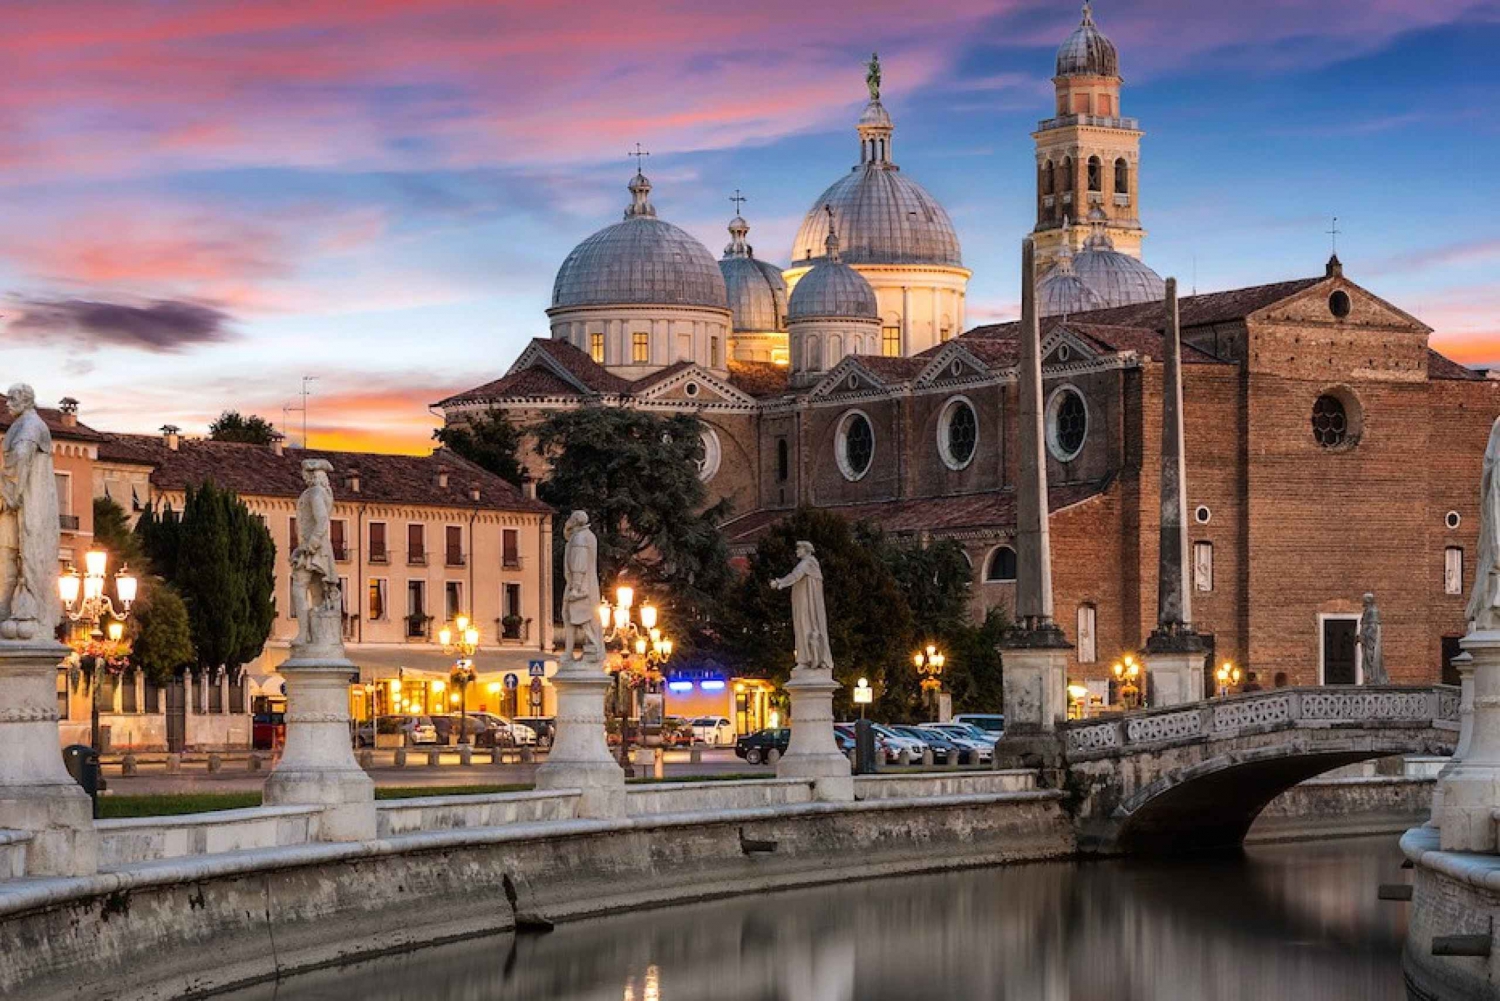 Padua: Self-Guided Walking Tour of the Historical Center